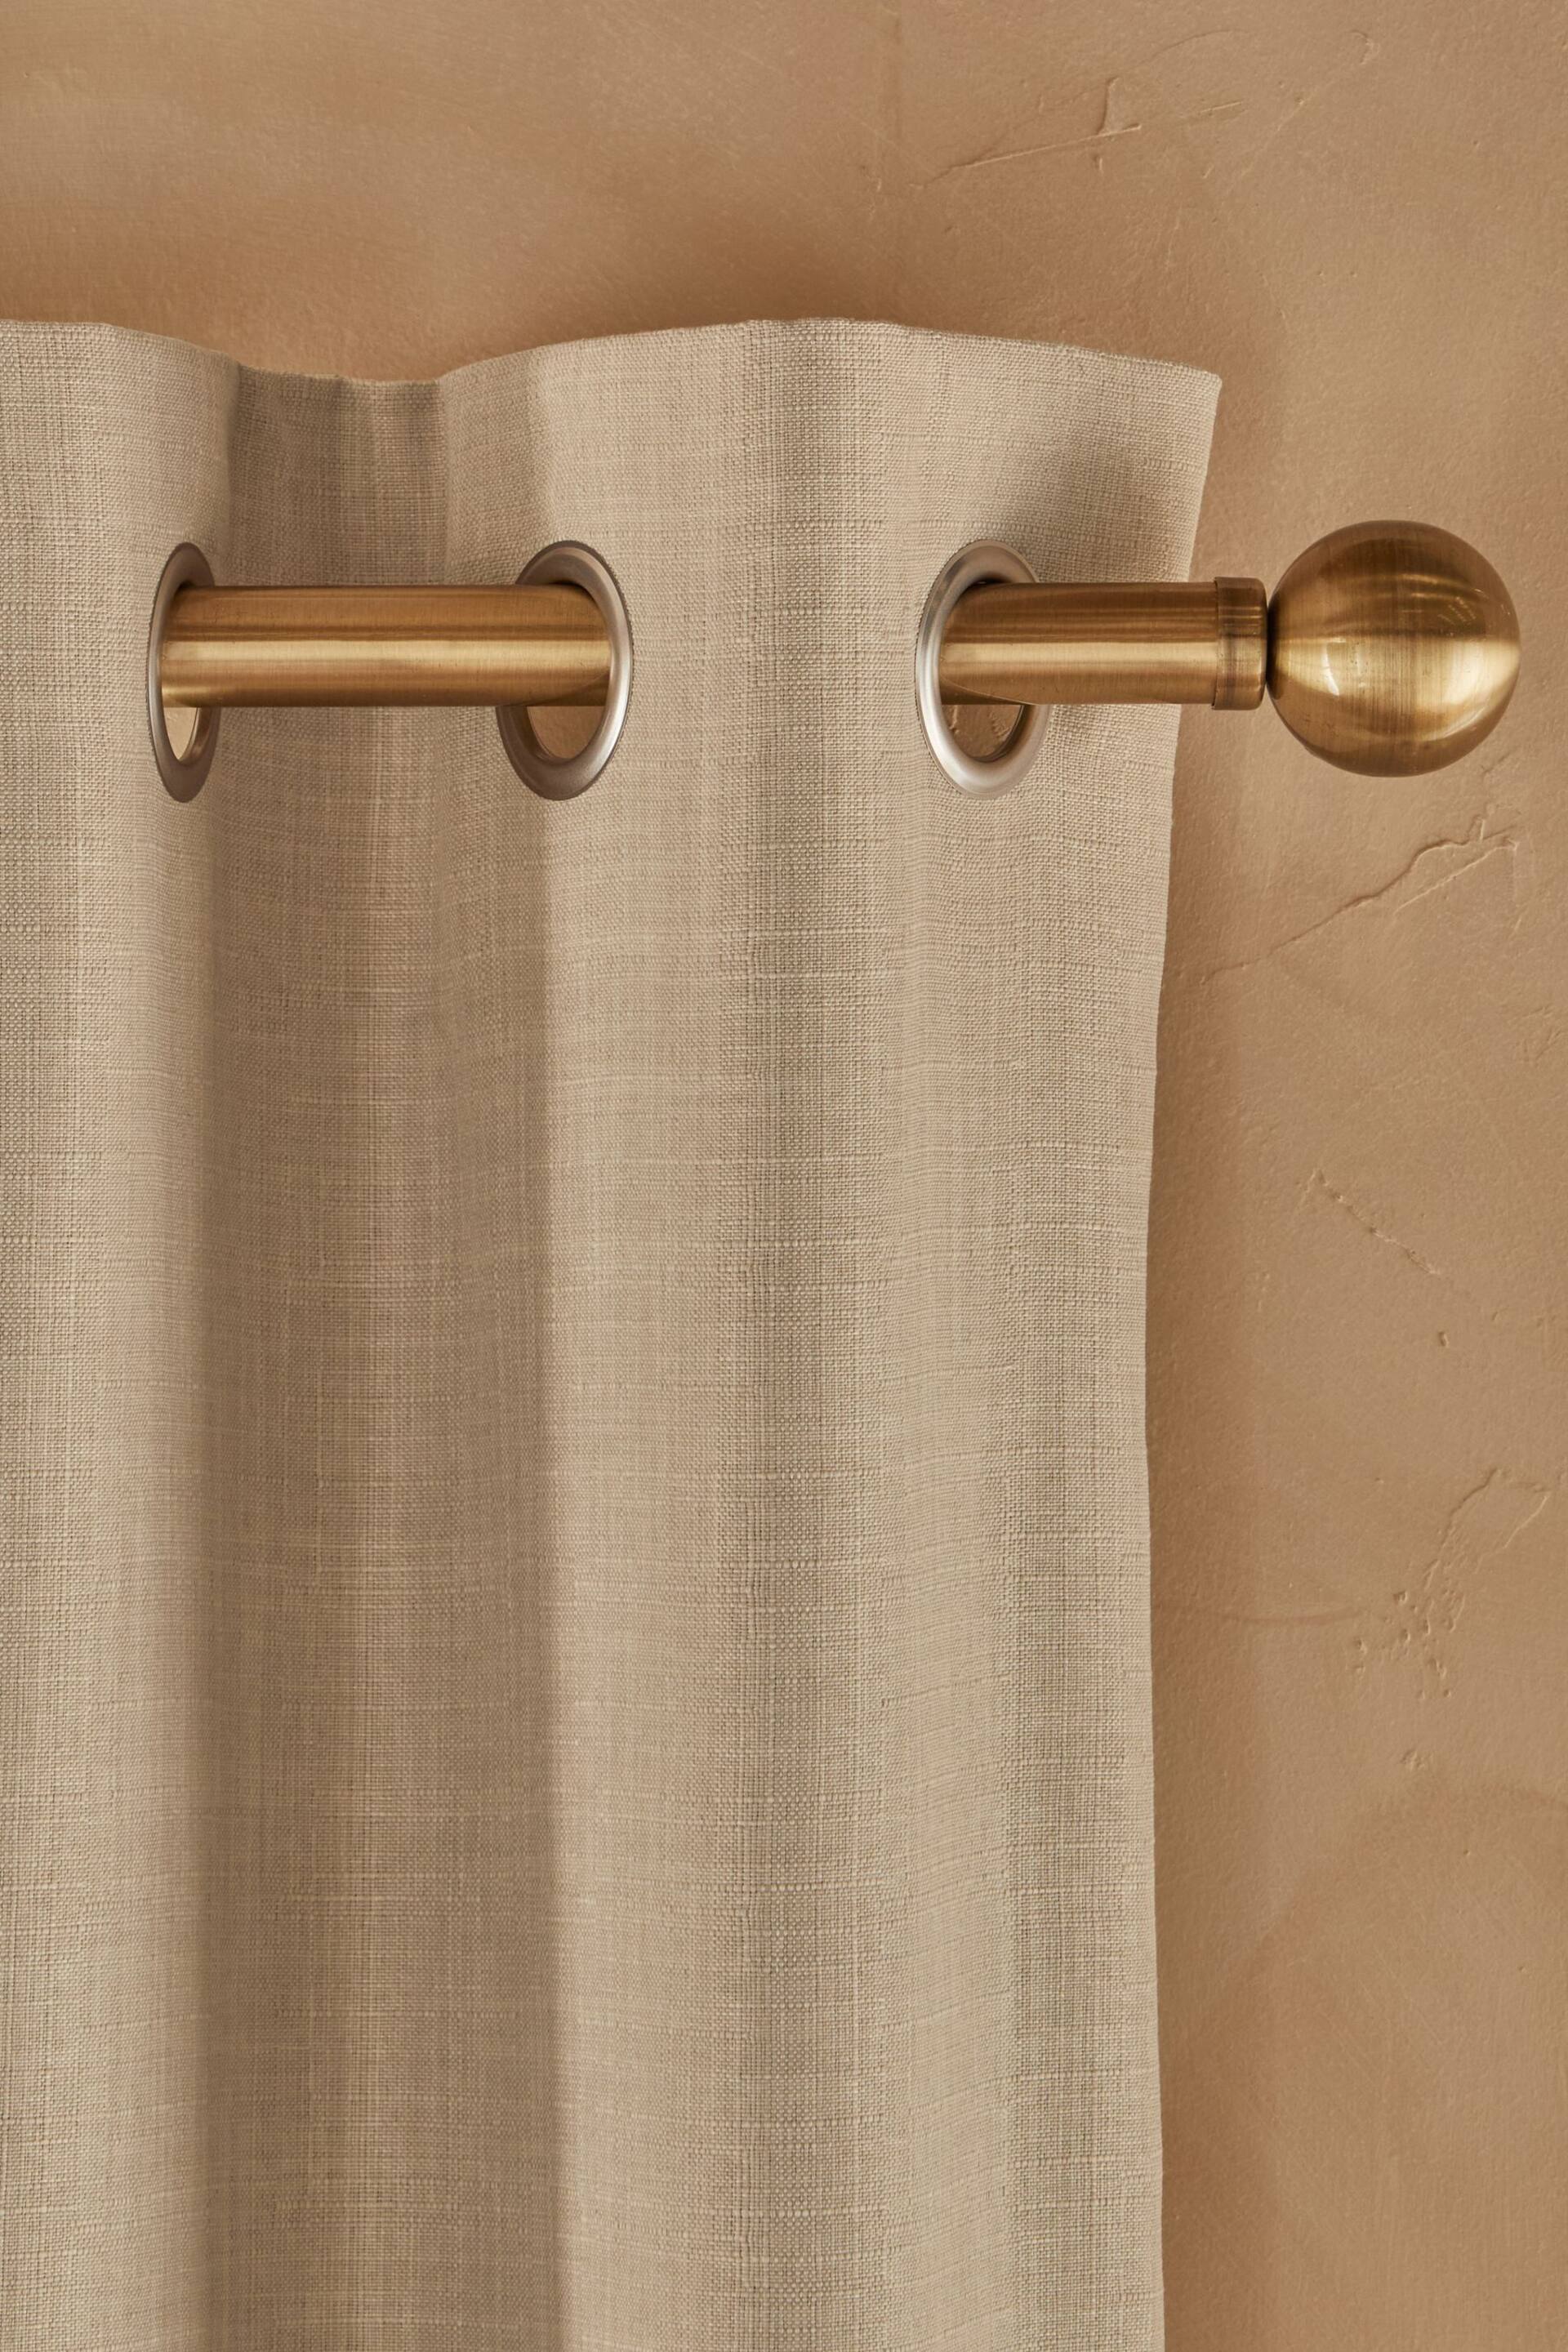 Light Natural Next Textured Tassel Edge Eyelet Blackout/Thermal Curtains - Image 6 of 7